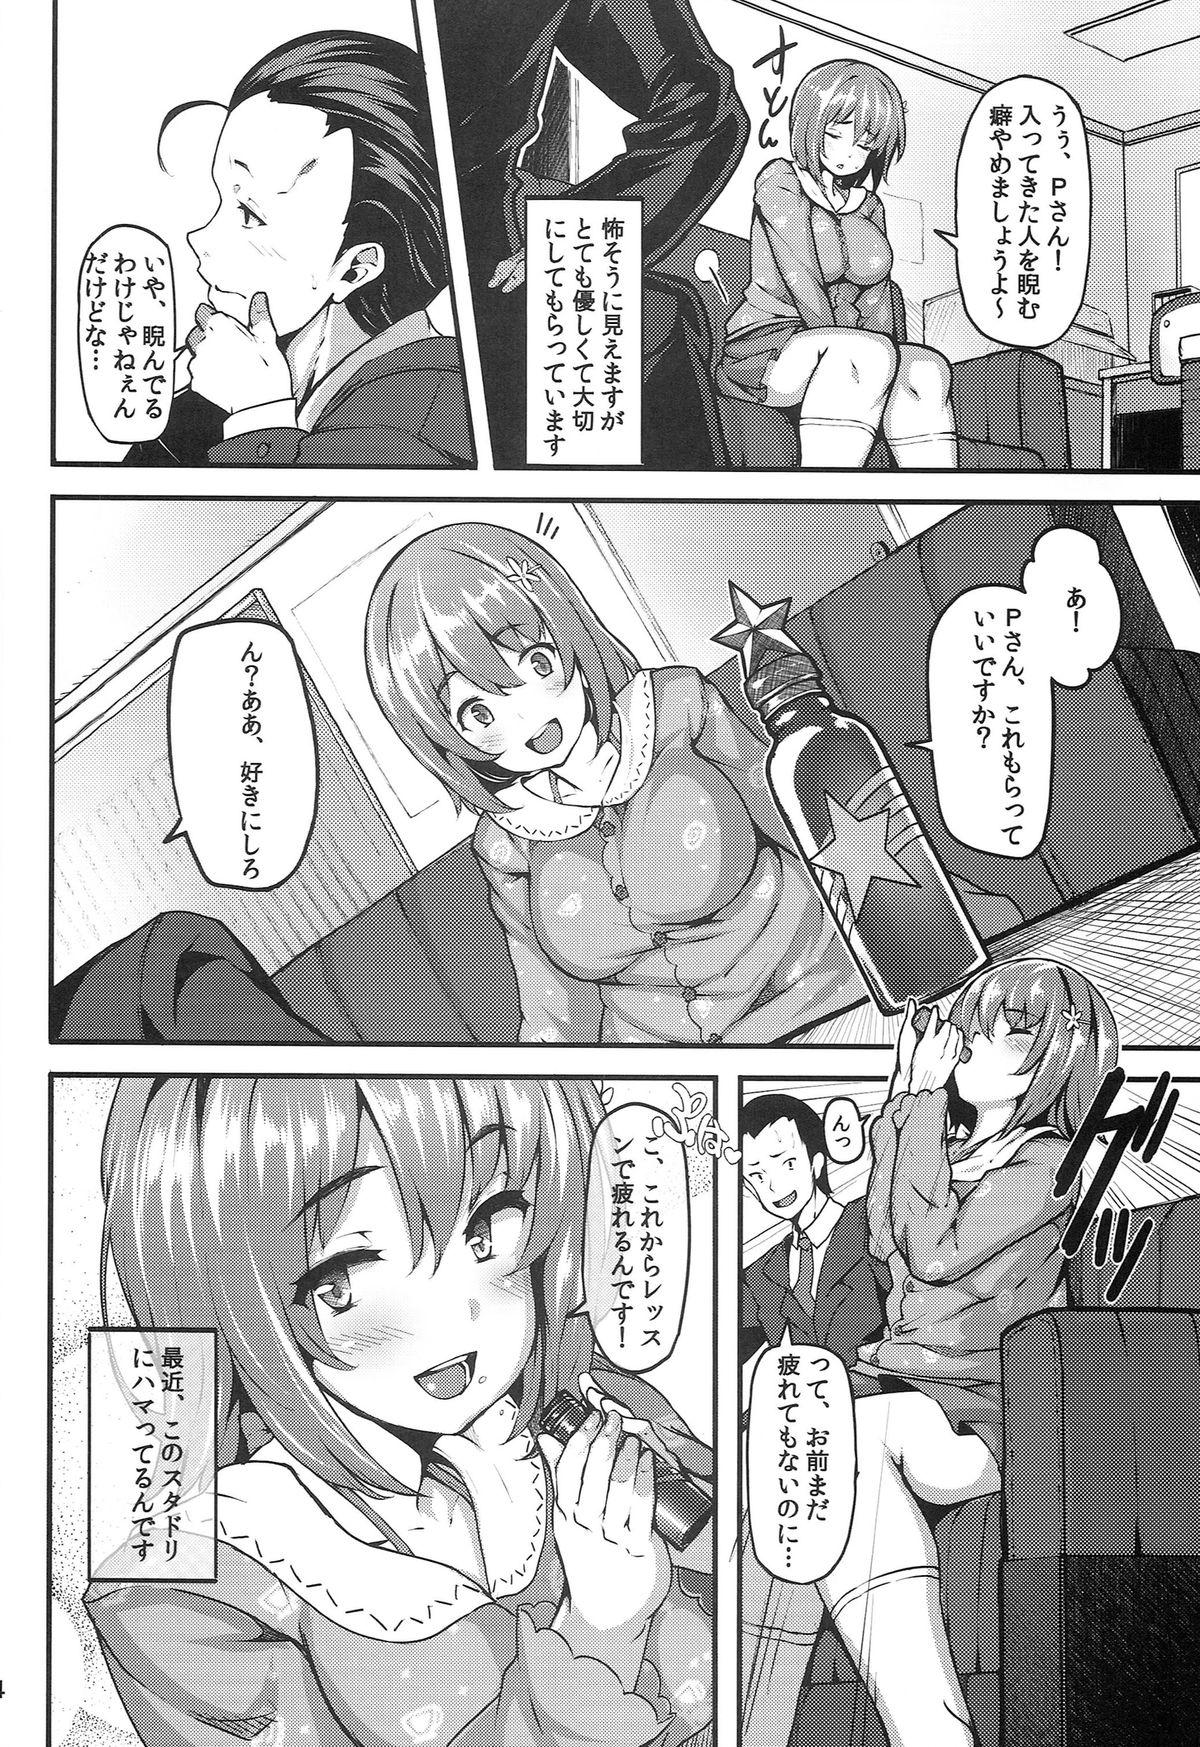 Small Tits Sweet Poison - The idolmaster Plumper - Page 4